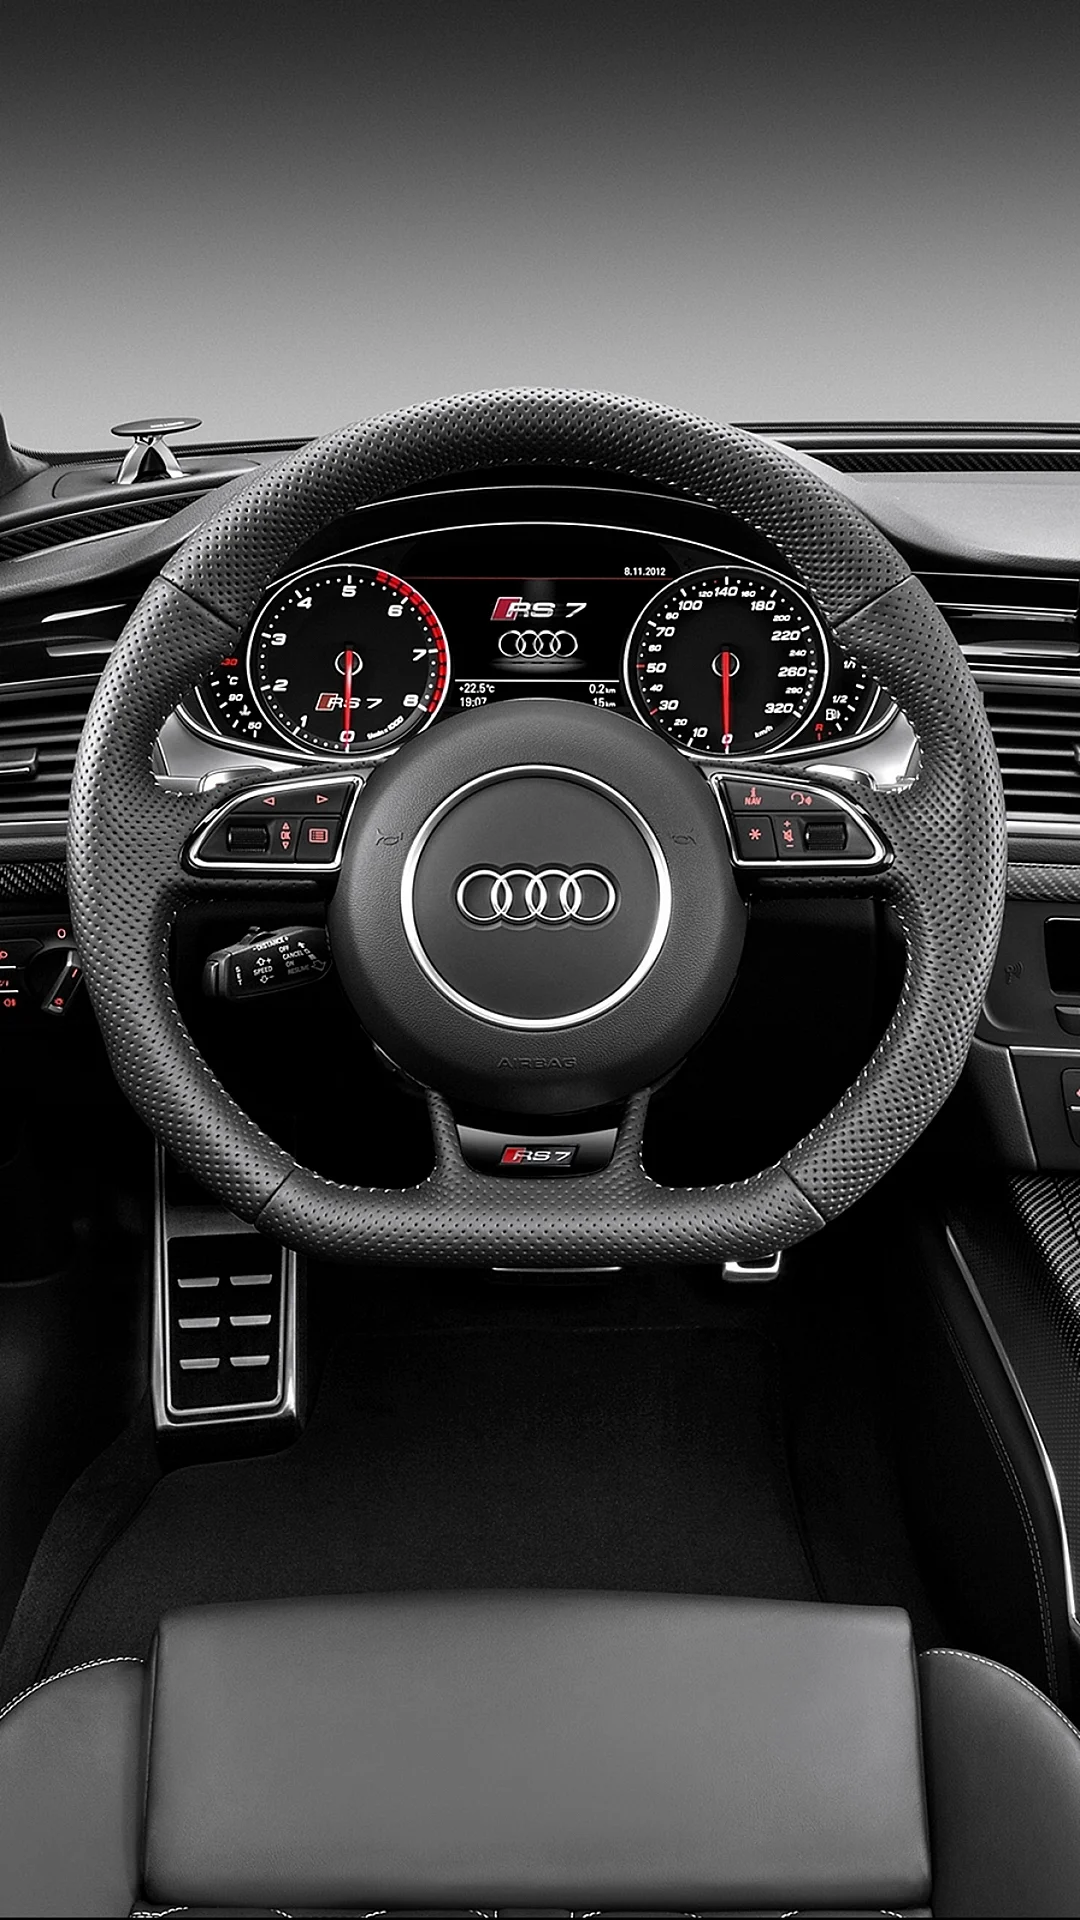 Audi Rs6 2014 Interior Wallpaper For iPhone